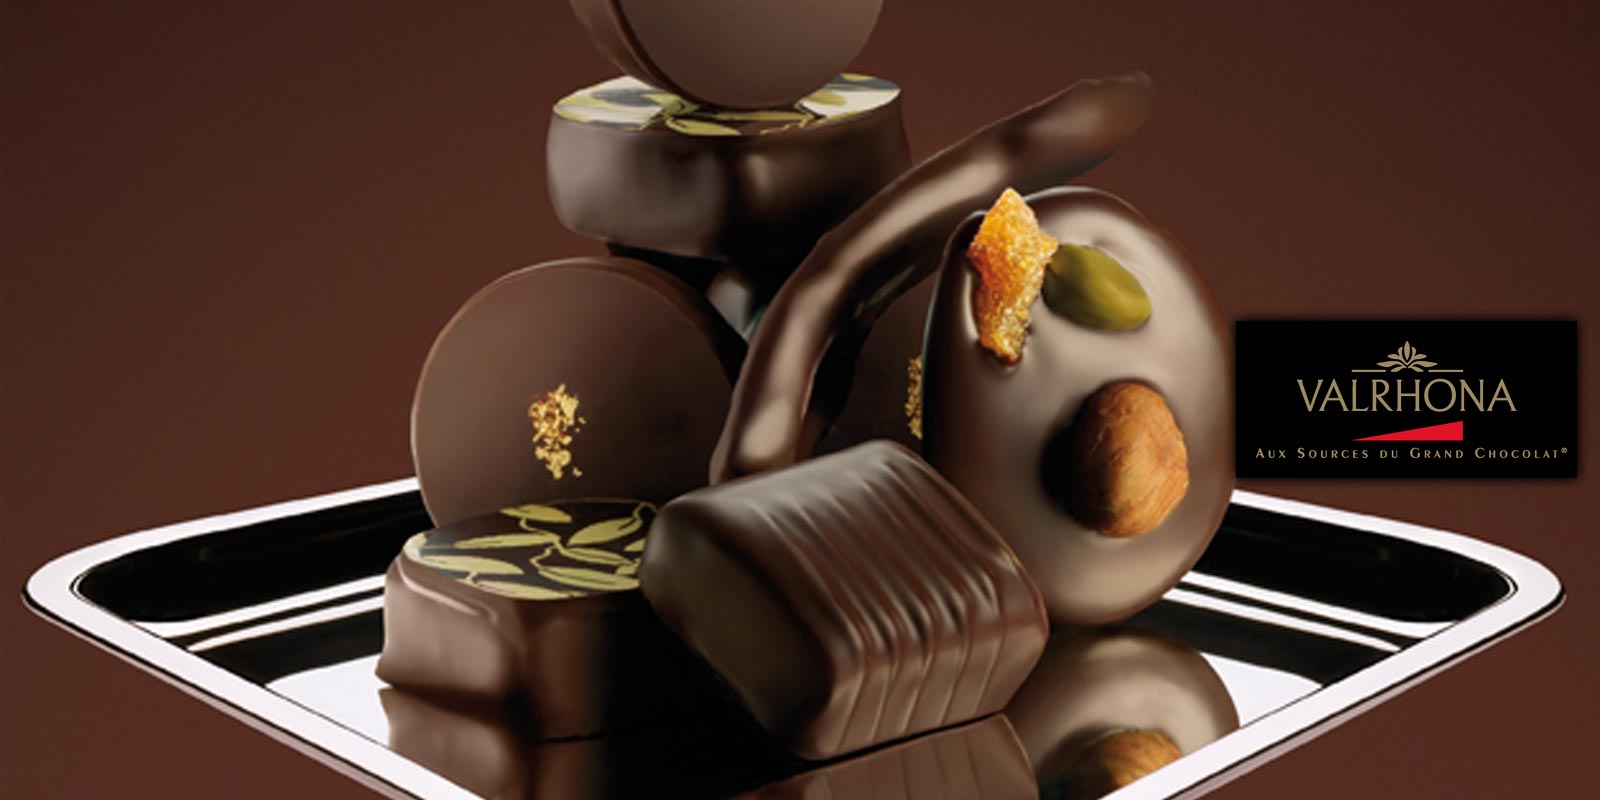 Praline masses such as nougat from Valrhona Different masses with different flavors.